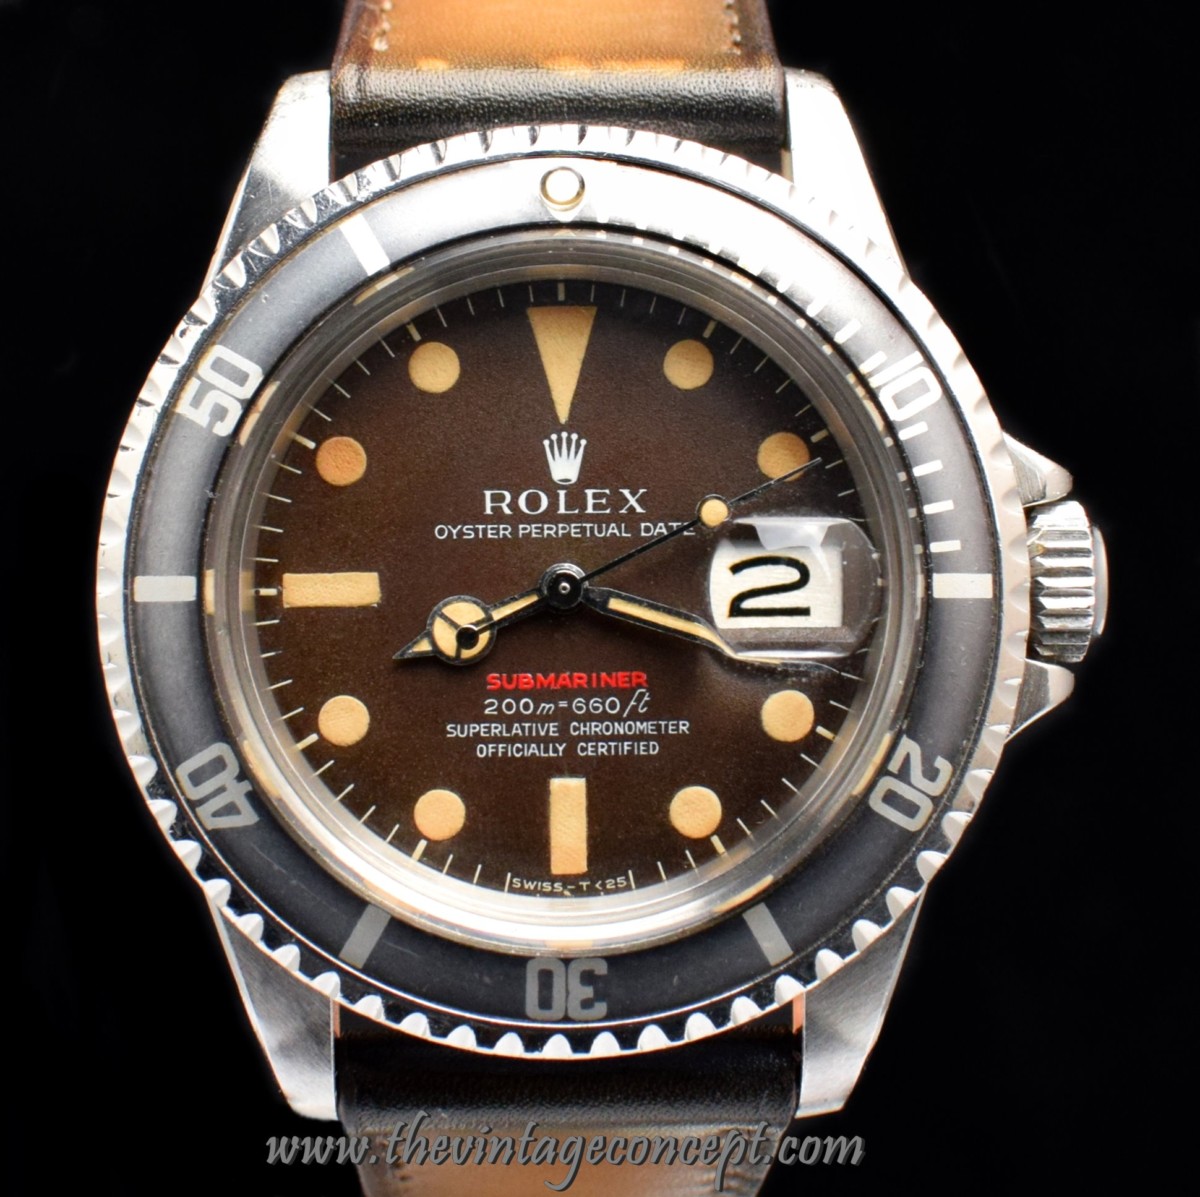 Rolex Submariner Single Red MK II Tropical Dial 1680 (SOLD) - The